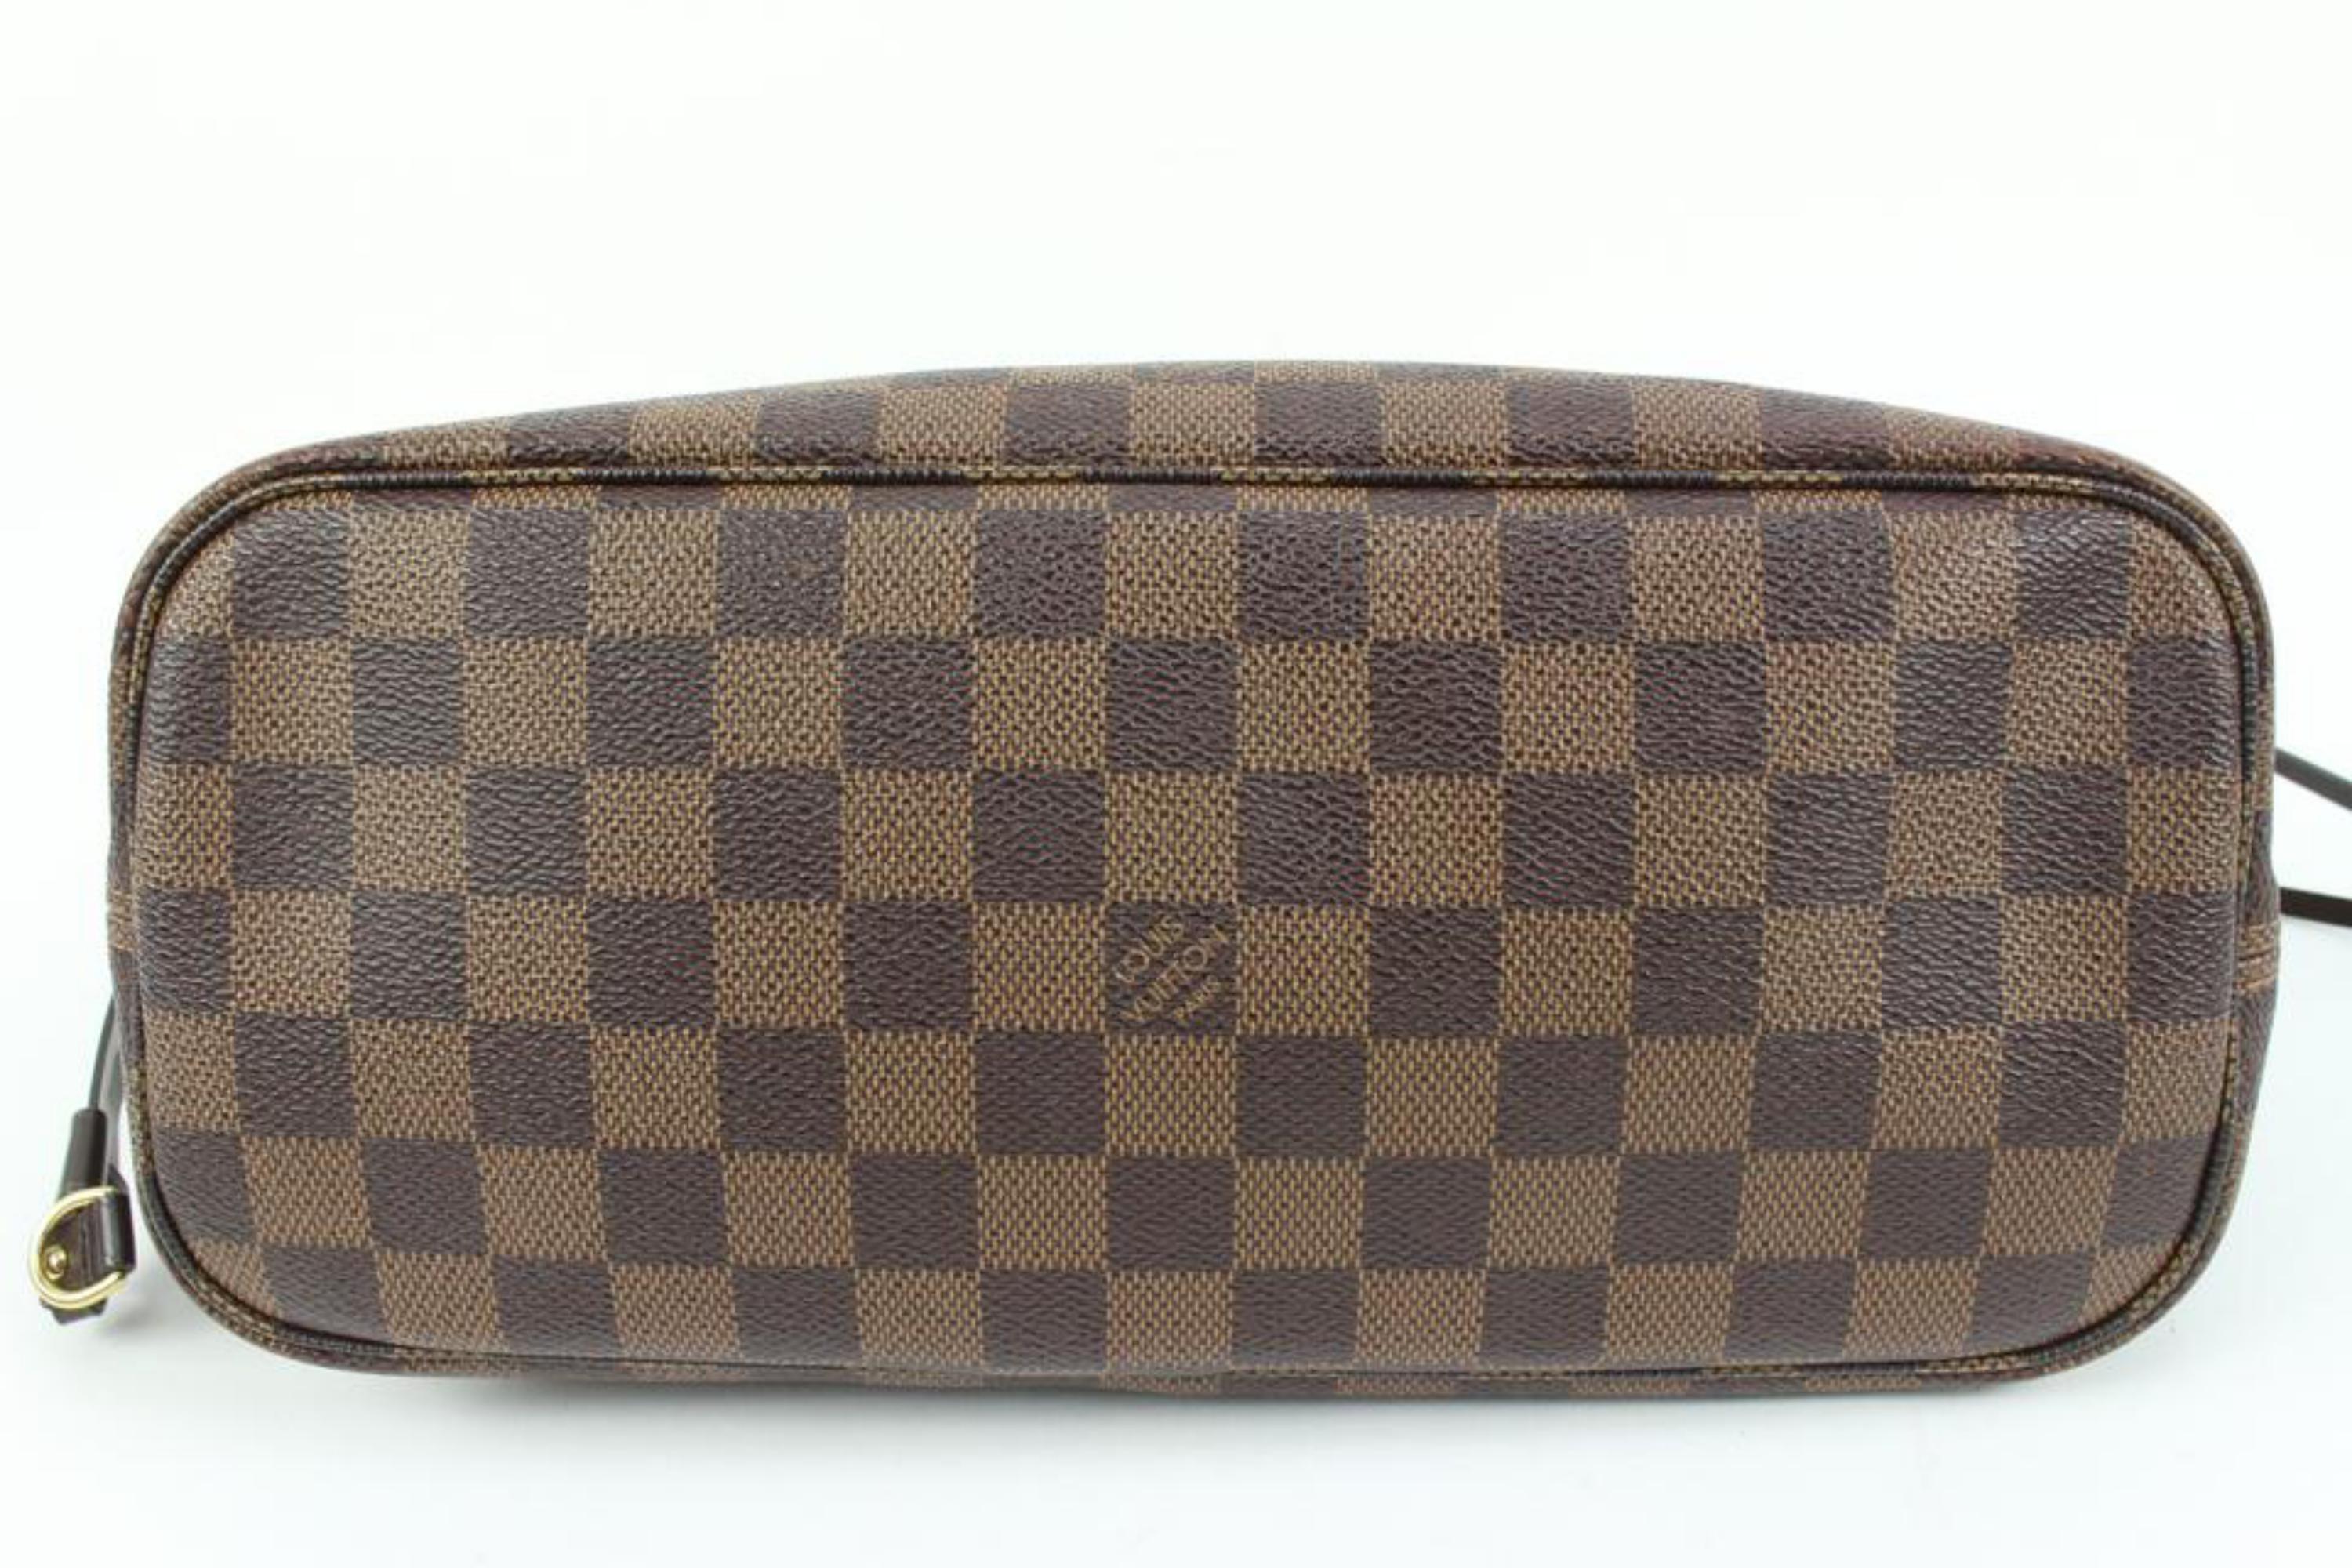 Louis Vuitton Small Damier Ebene Neverfull PM with Pouch with pouch 41lk67 For Sale 7